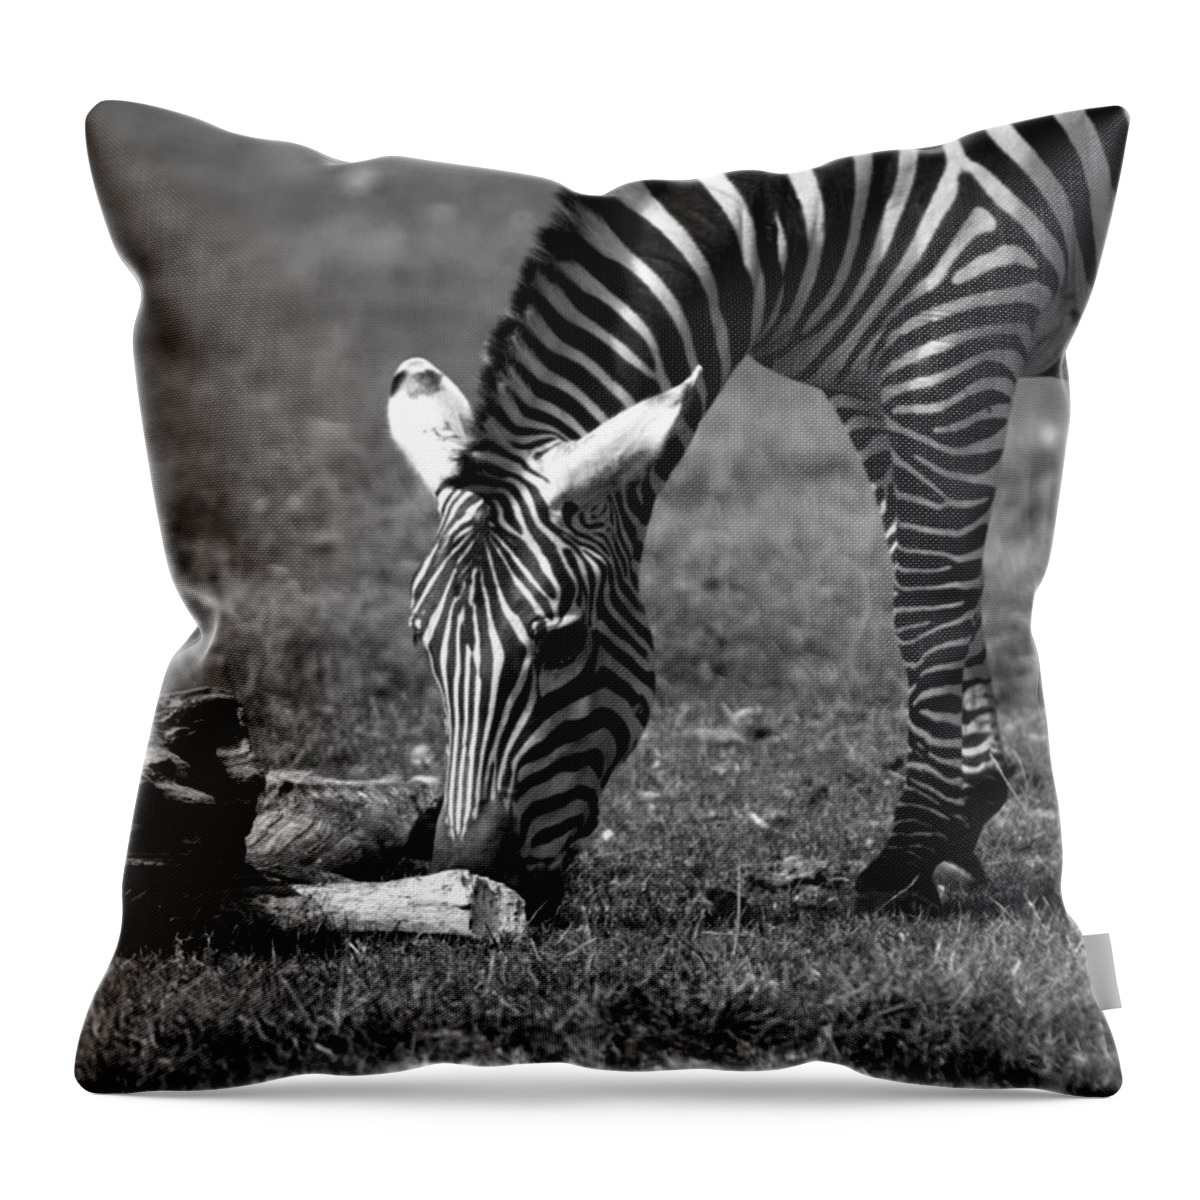 Zebra Throw Pillow featuring the photograph Zebra by Tracy Winter